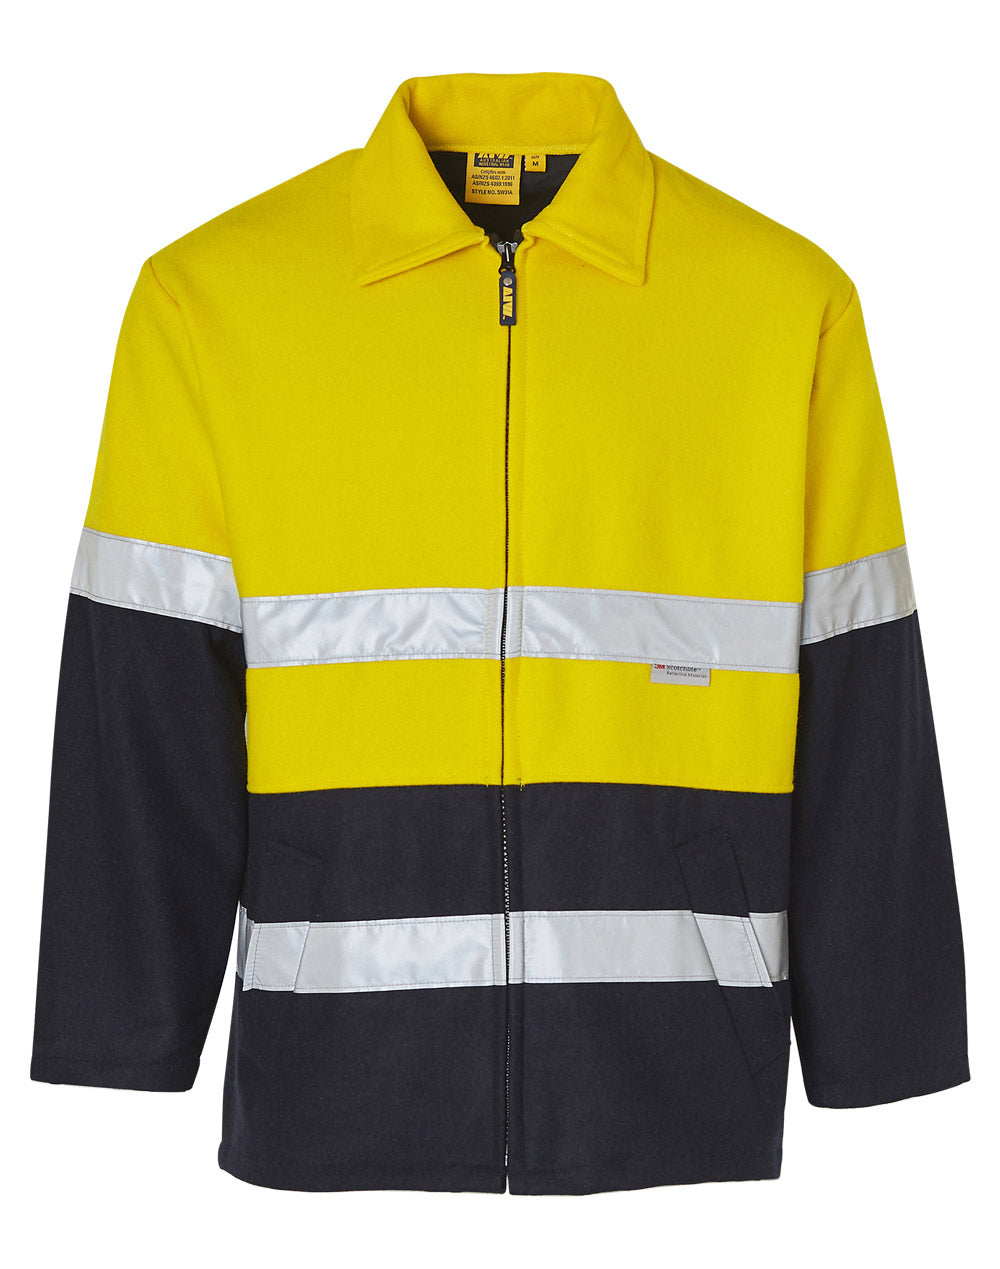 Winning Spirit SW31A HI-VIS TWO TONE REFLECTIVE BLUEY JACKET in fluorescent yellow